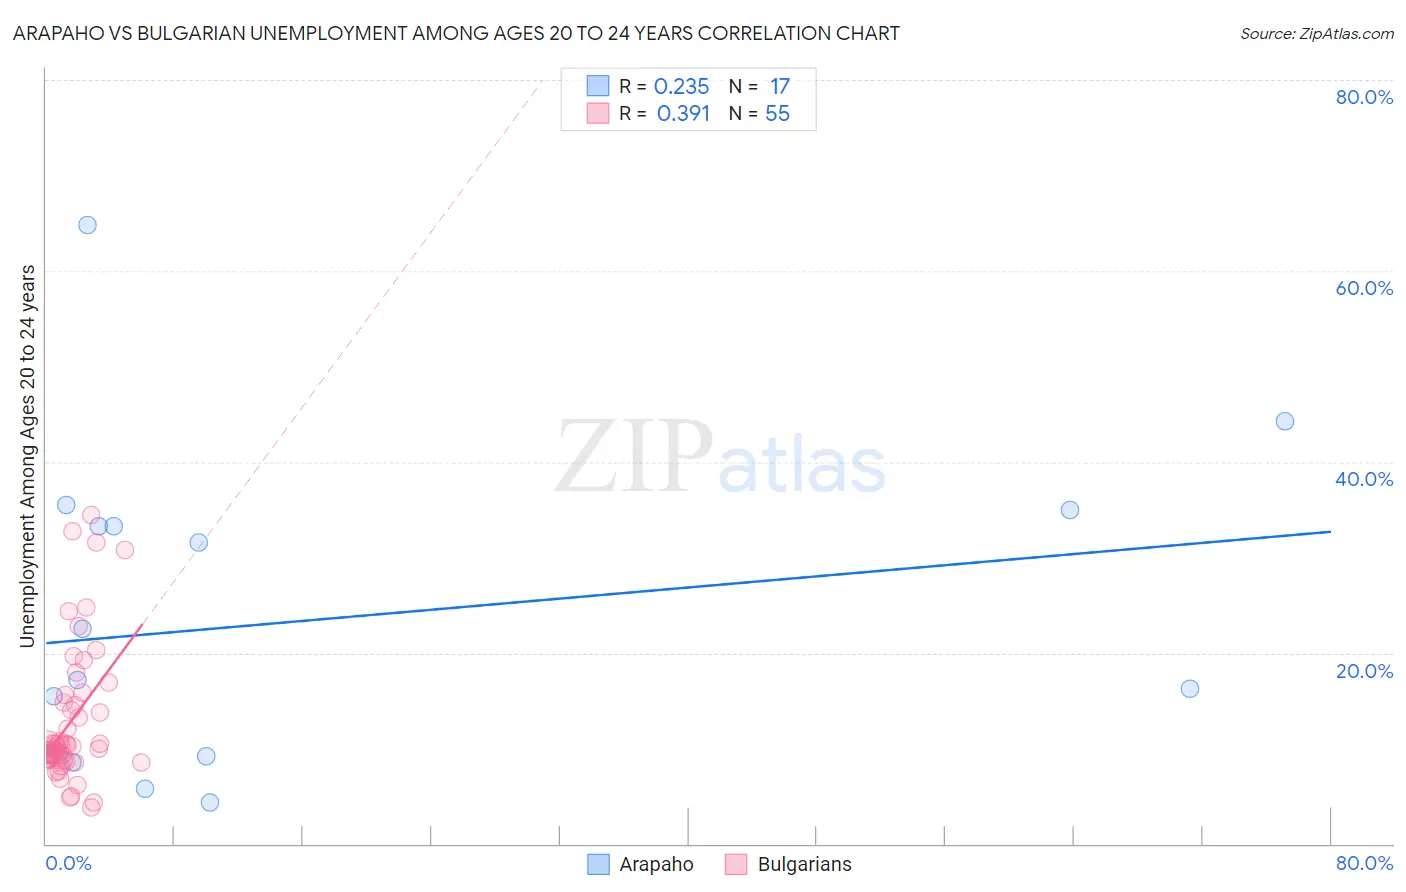 Arapaho vs Bulgarian Unemployment Among Ages 20 to 24 years